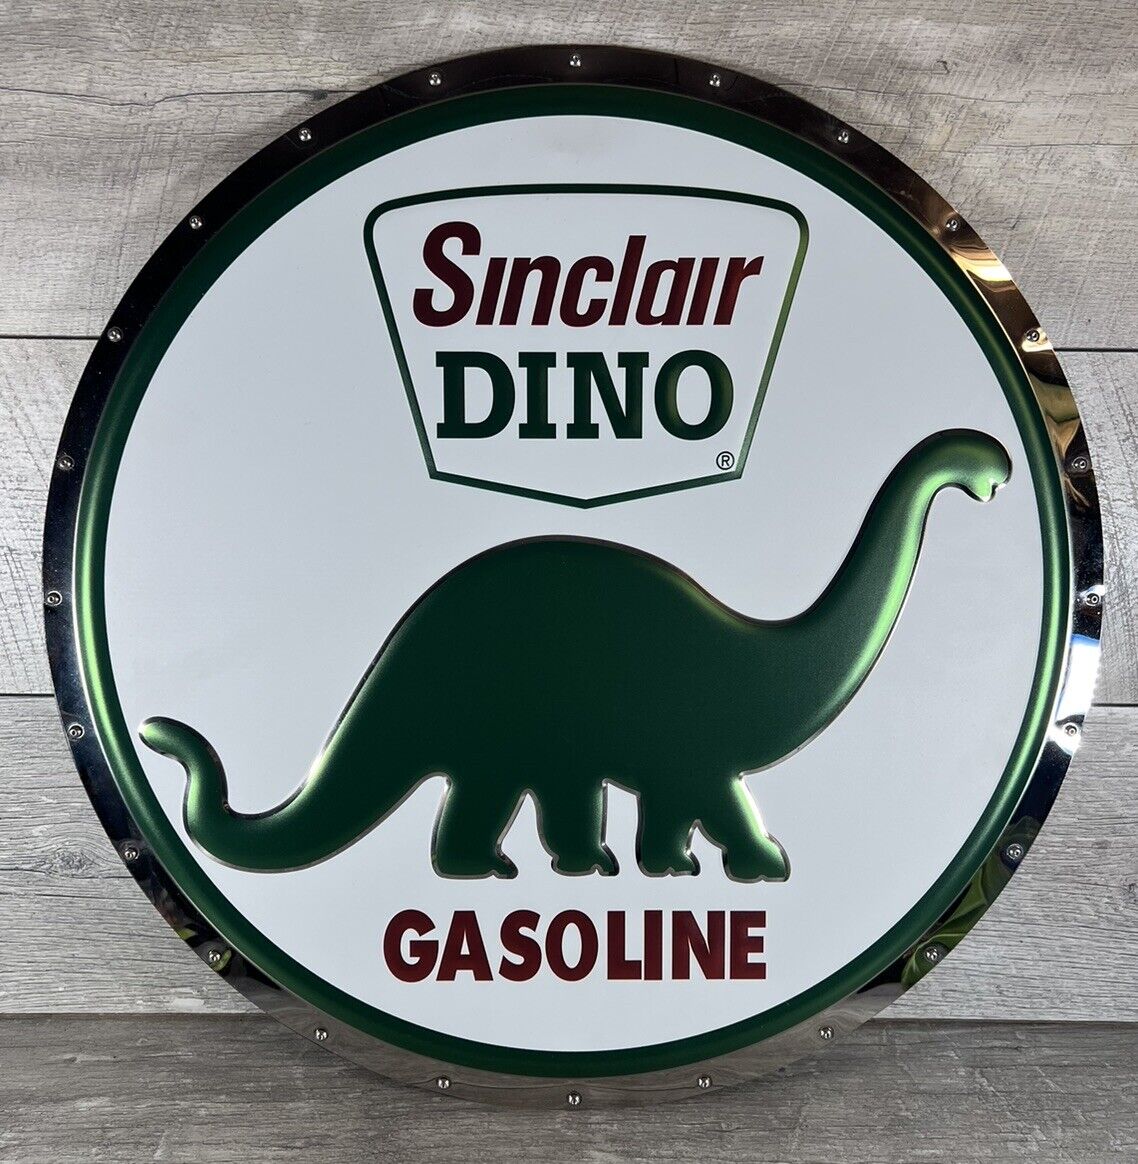 Sinclair Dino Gas Oil Gasoline 22” Metal Sign By Chrome Domz Stainless Steel